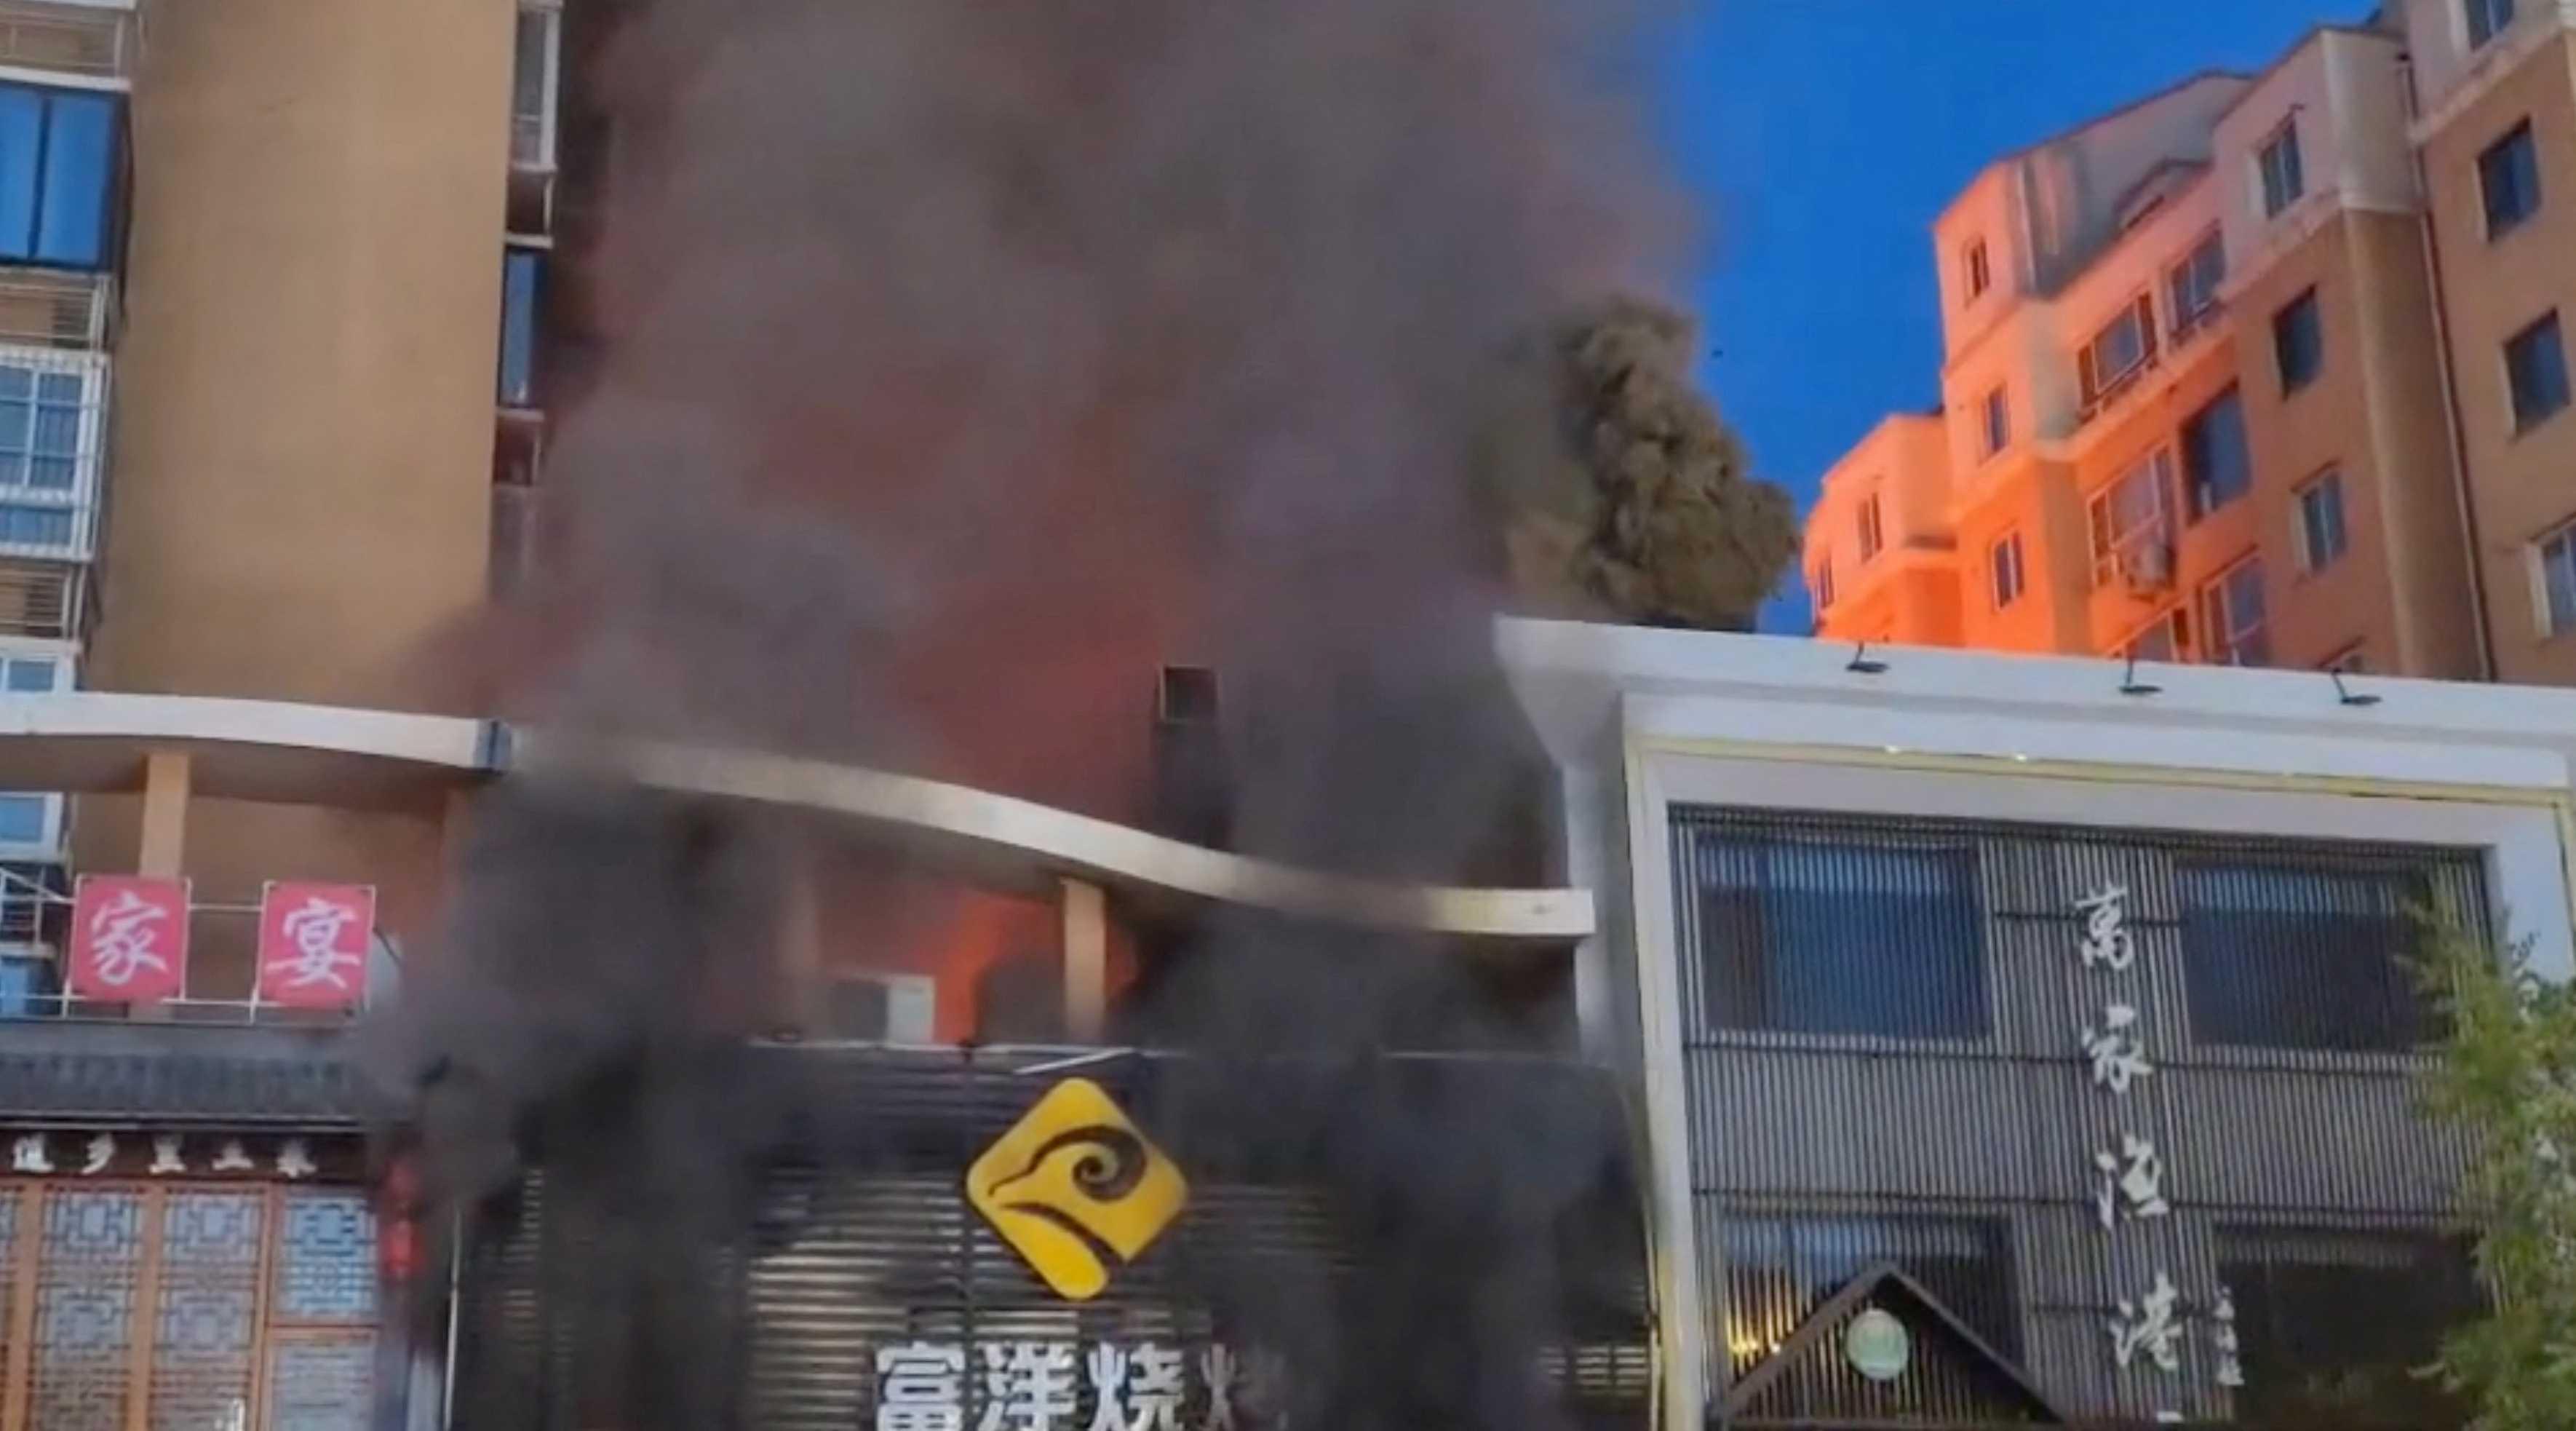 Smoke rises from a building following a gas explosion at a barbecue restaurant in Yinchuan city, Ningxia, China, June 21, in this screengrab obtained from a handout video. Photo: Reuters